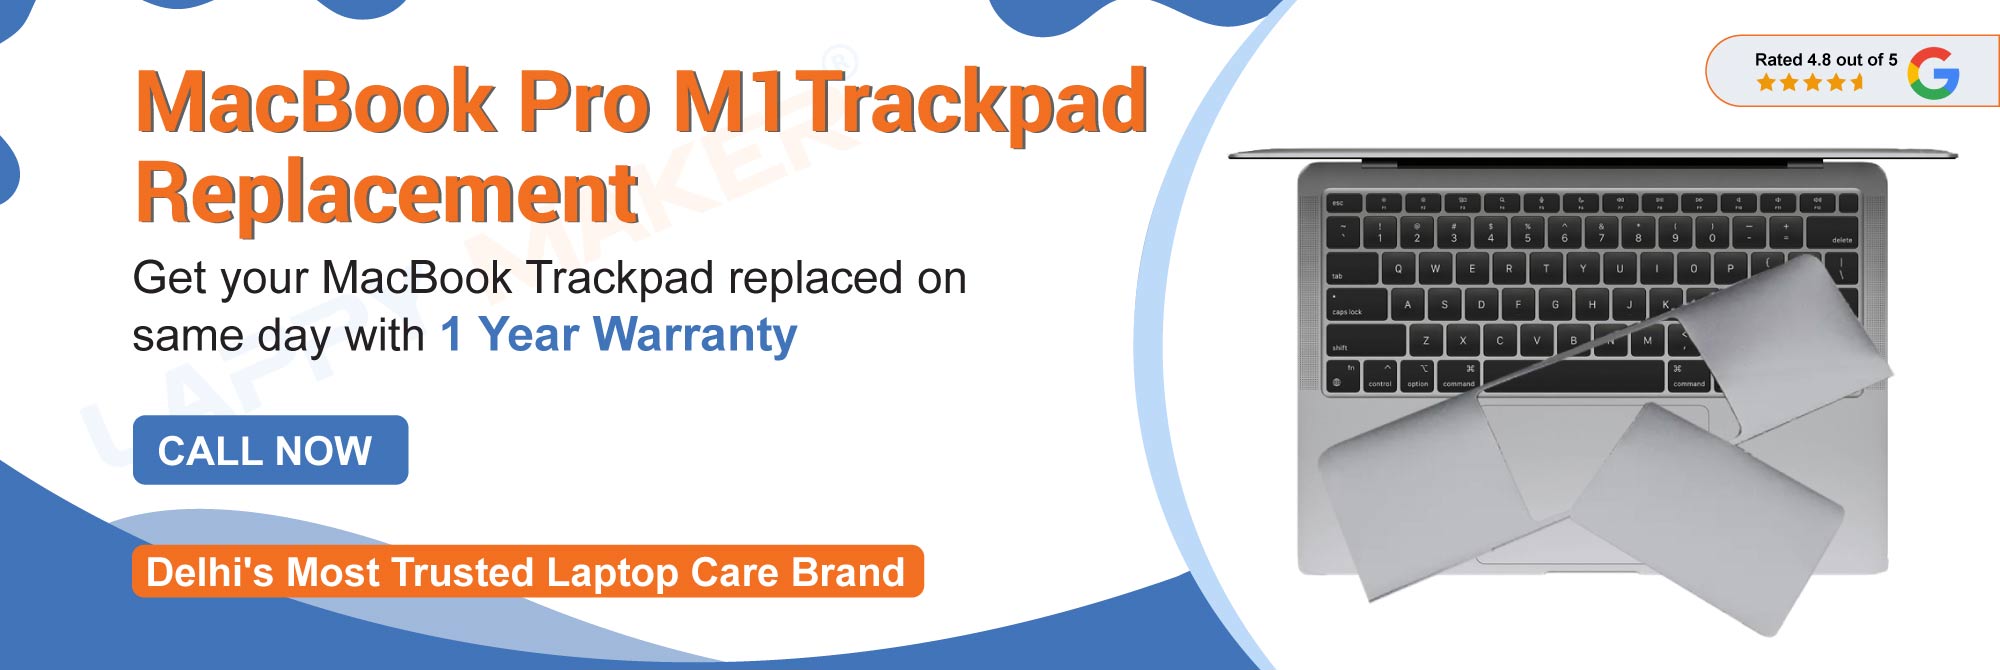 macbook pro m1 a2338 trackpad replacement